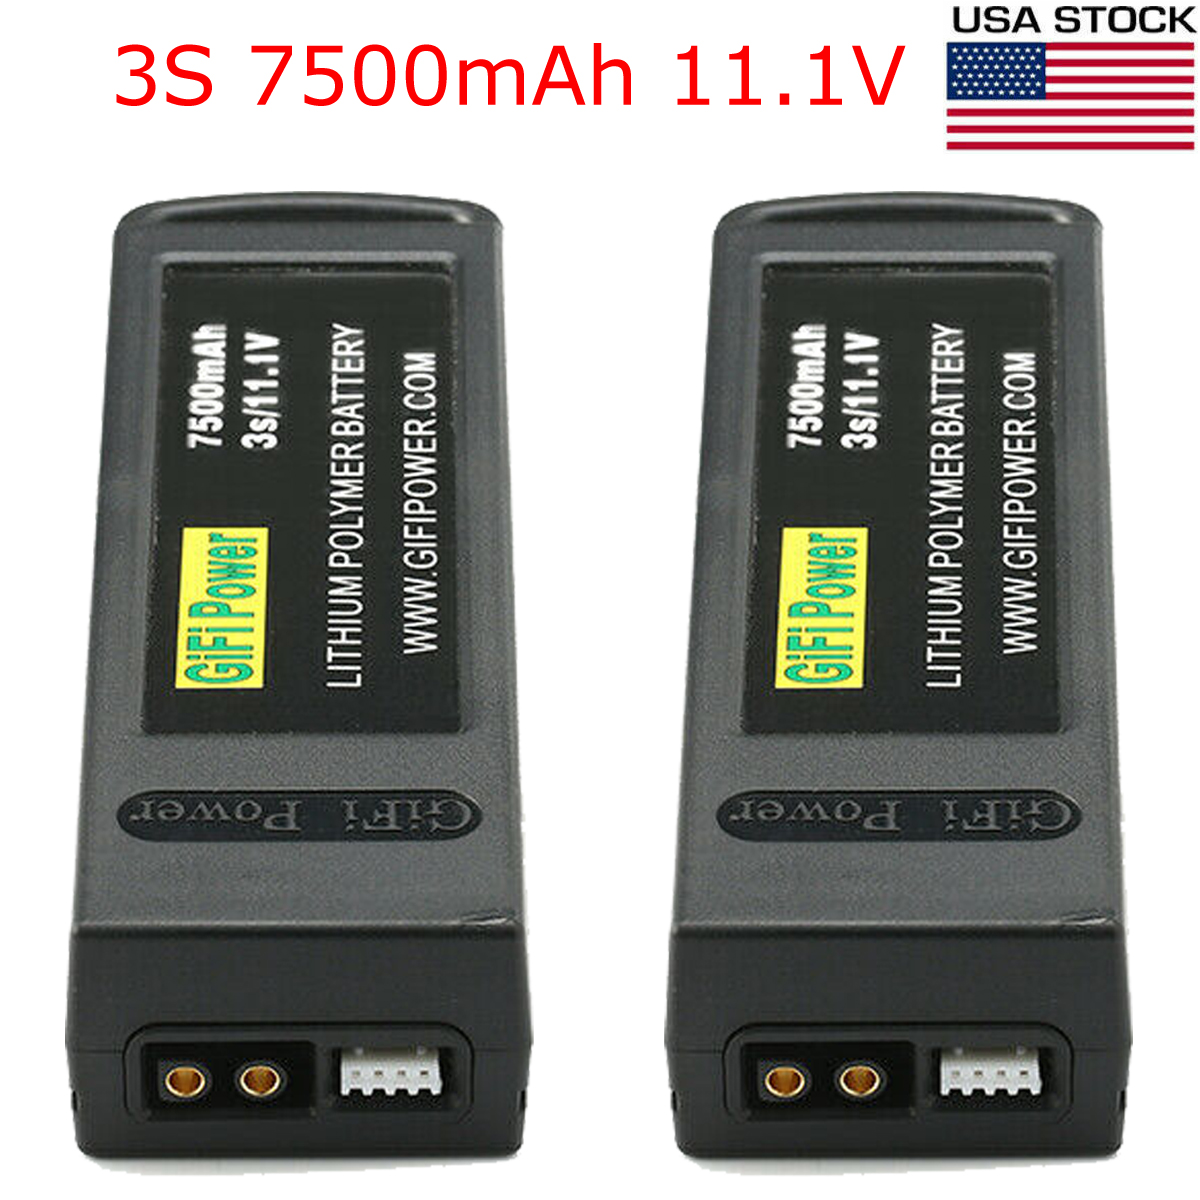 PRO Battery / Q500 7500mAh Upgrade Battery For Yuneec Q500 Battery Q500